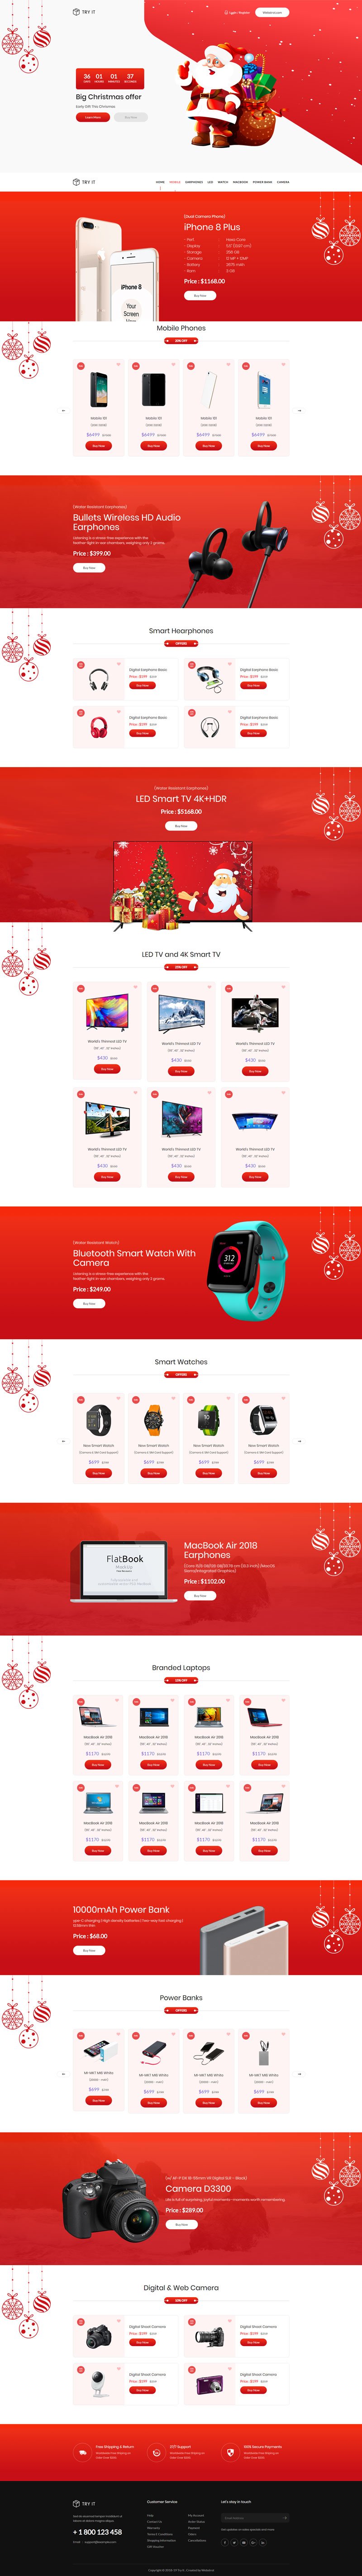 Tryit - Product Offer Landing Page